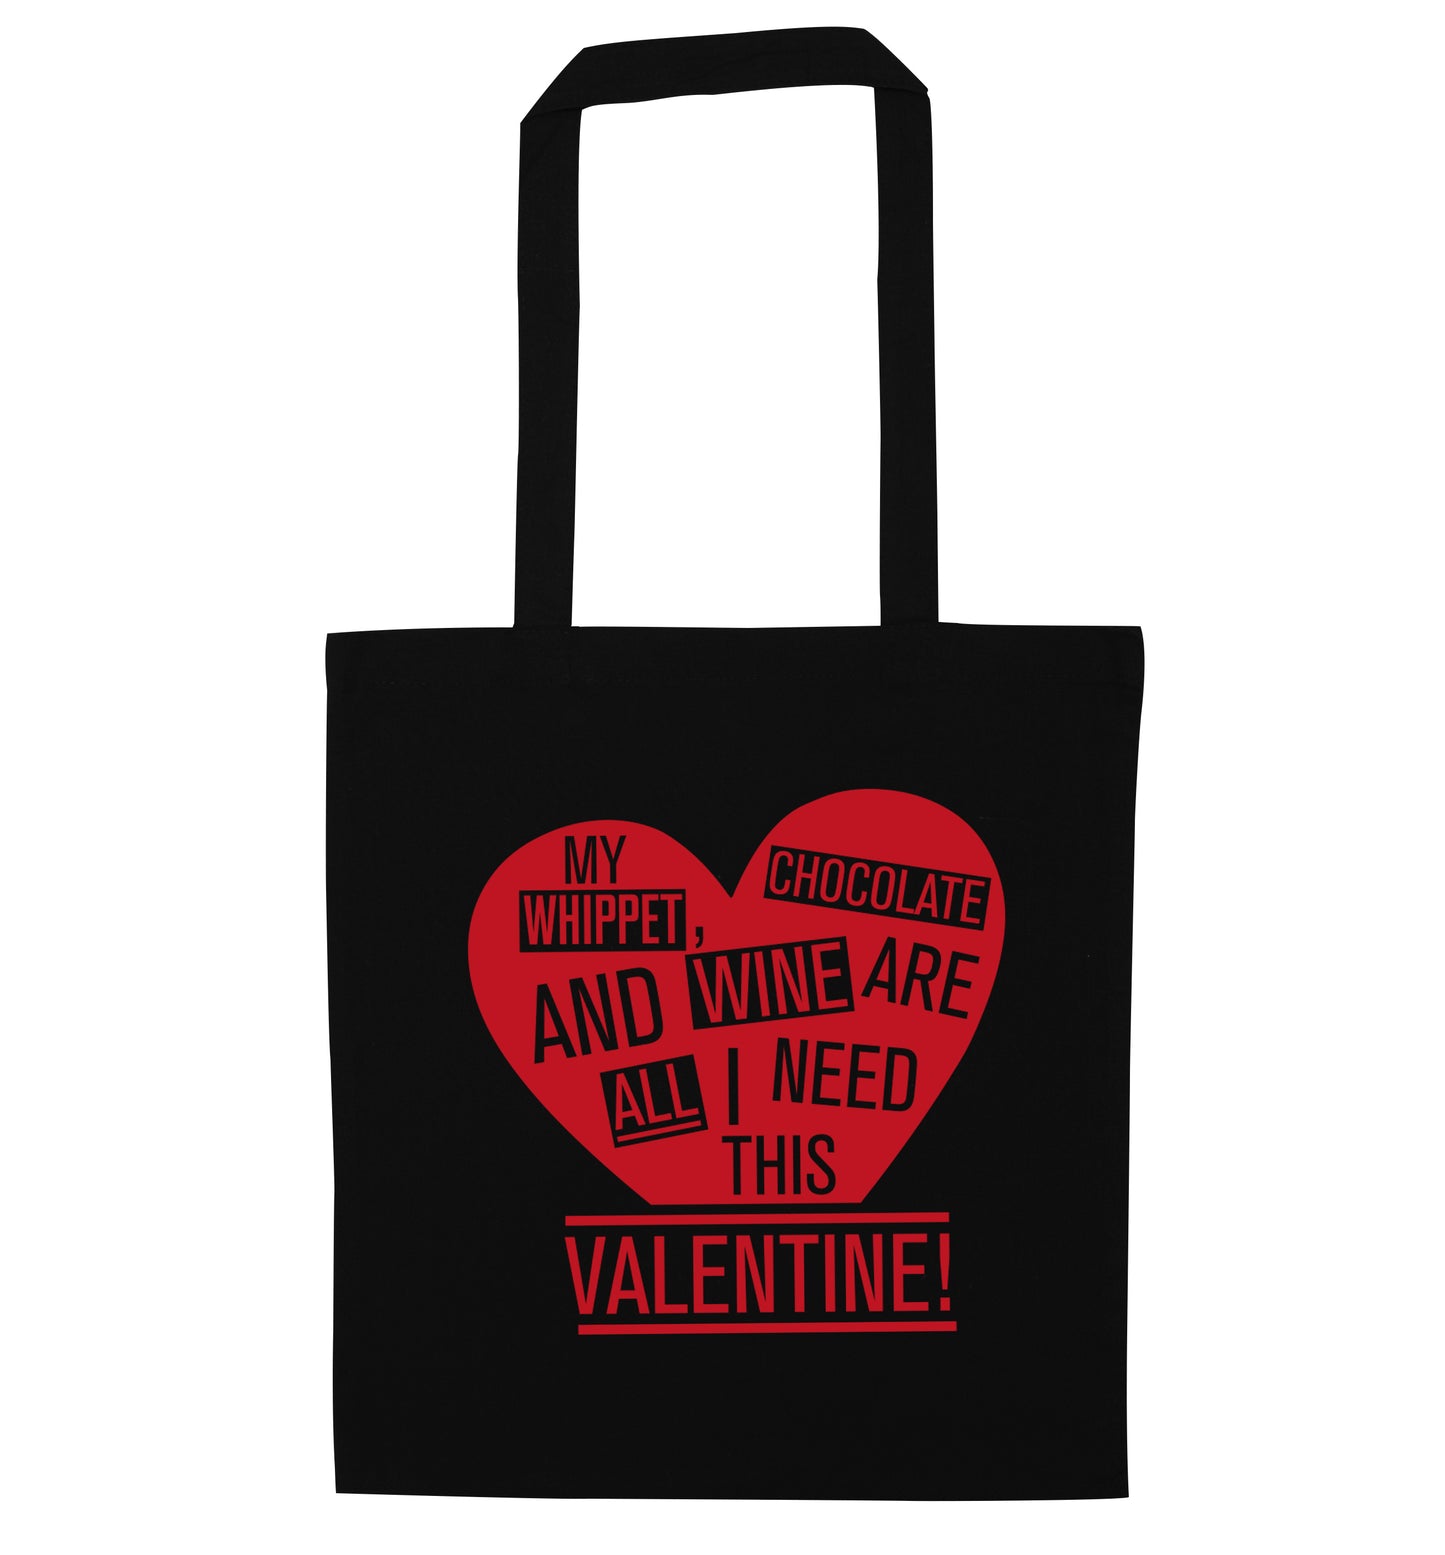 My whippet, chocolate and wine are all I need this valentine! black tote bag